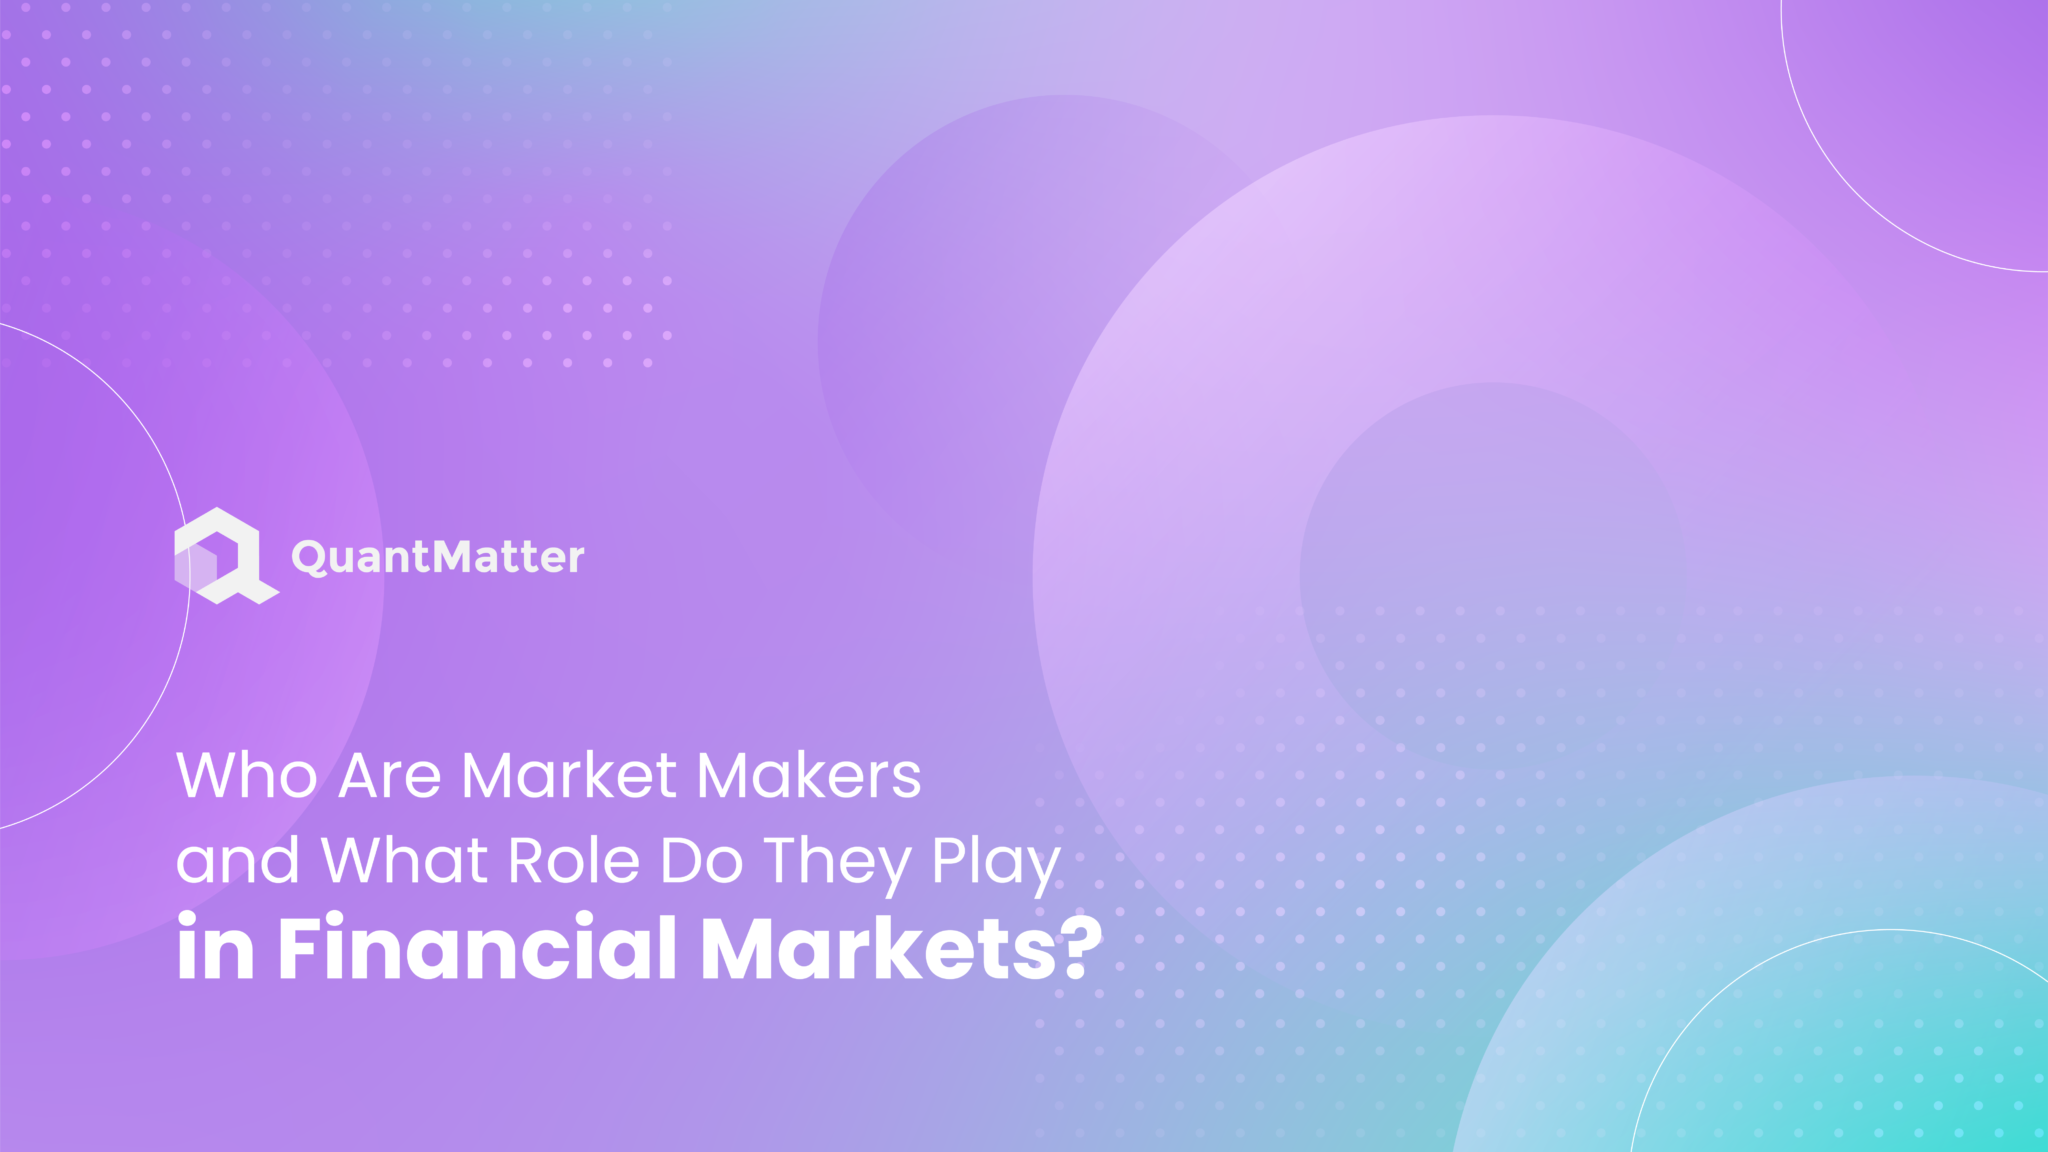 Who Are Market Makers and What Role Do They Play in Financial Markets